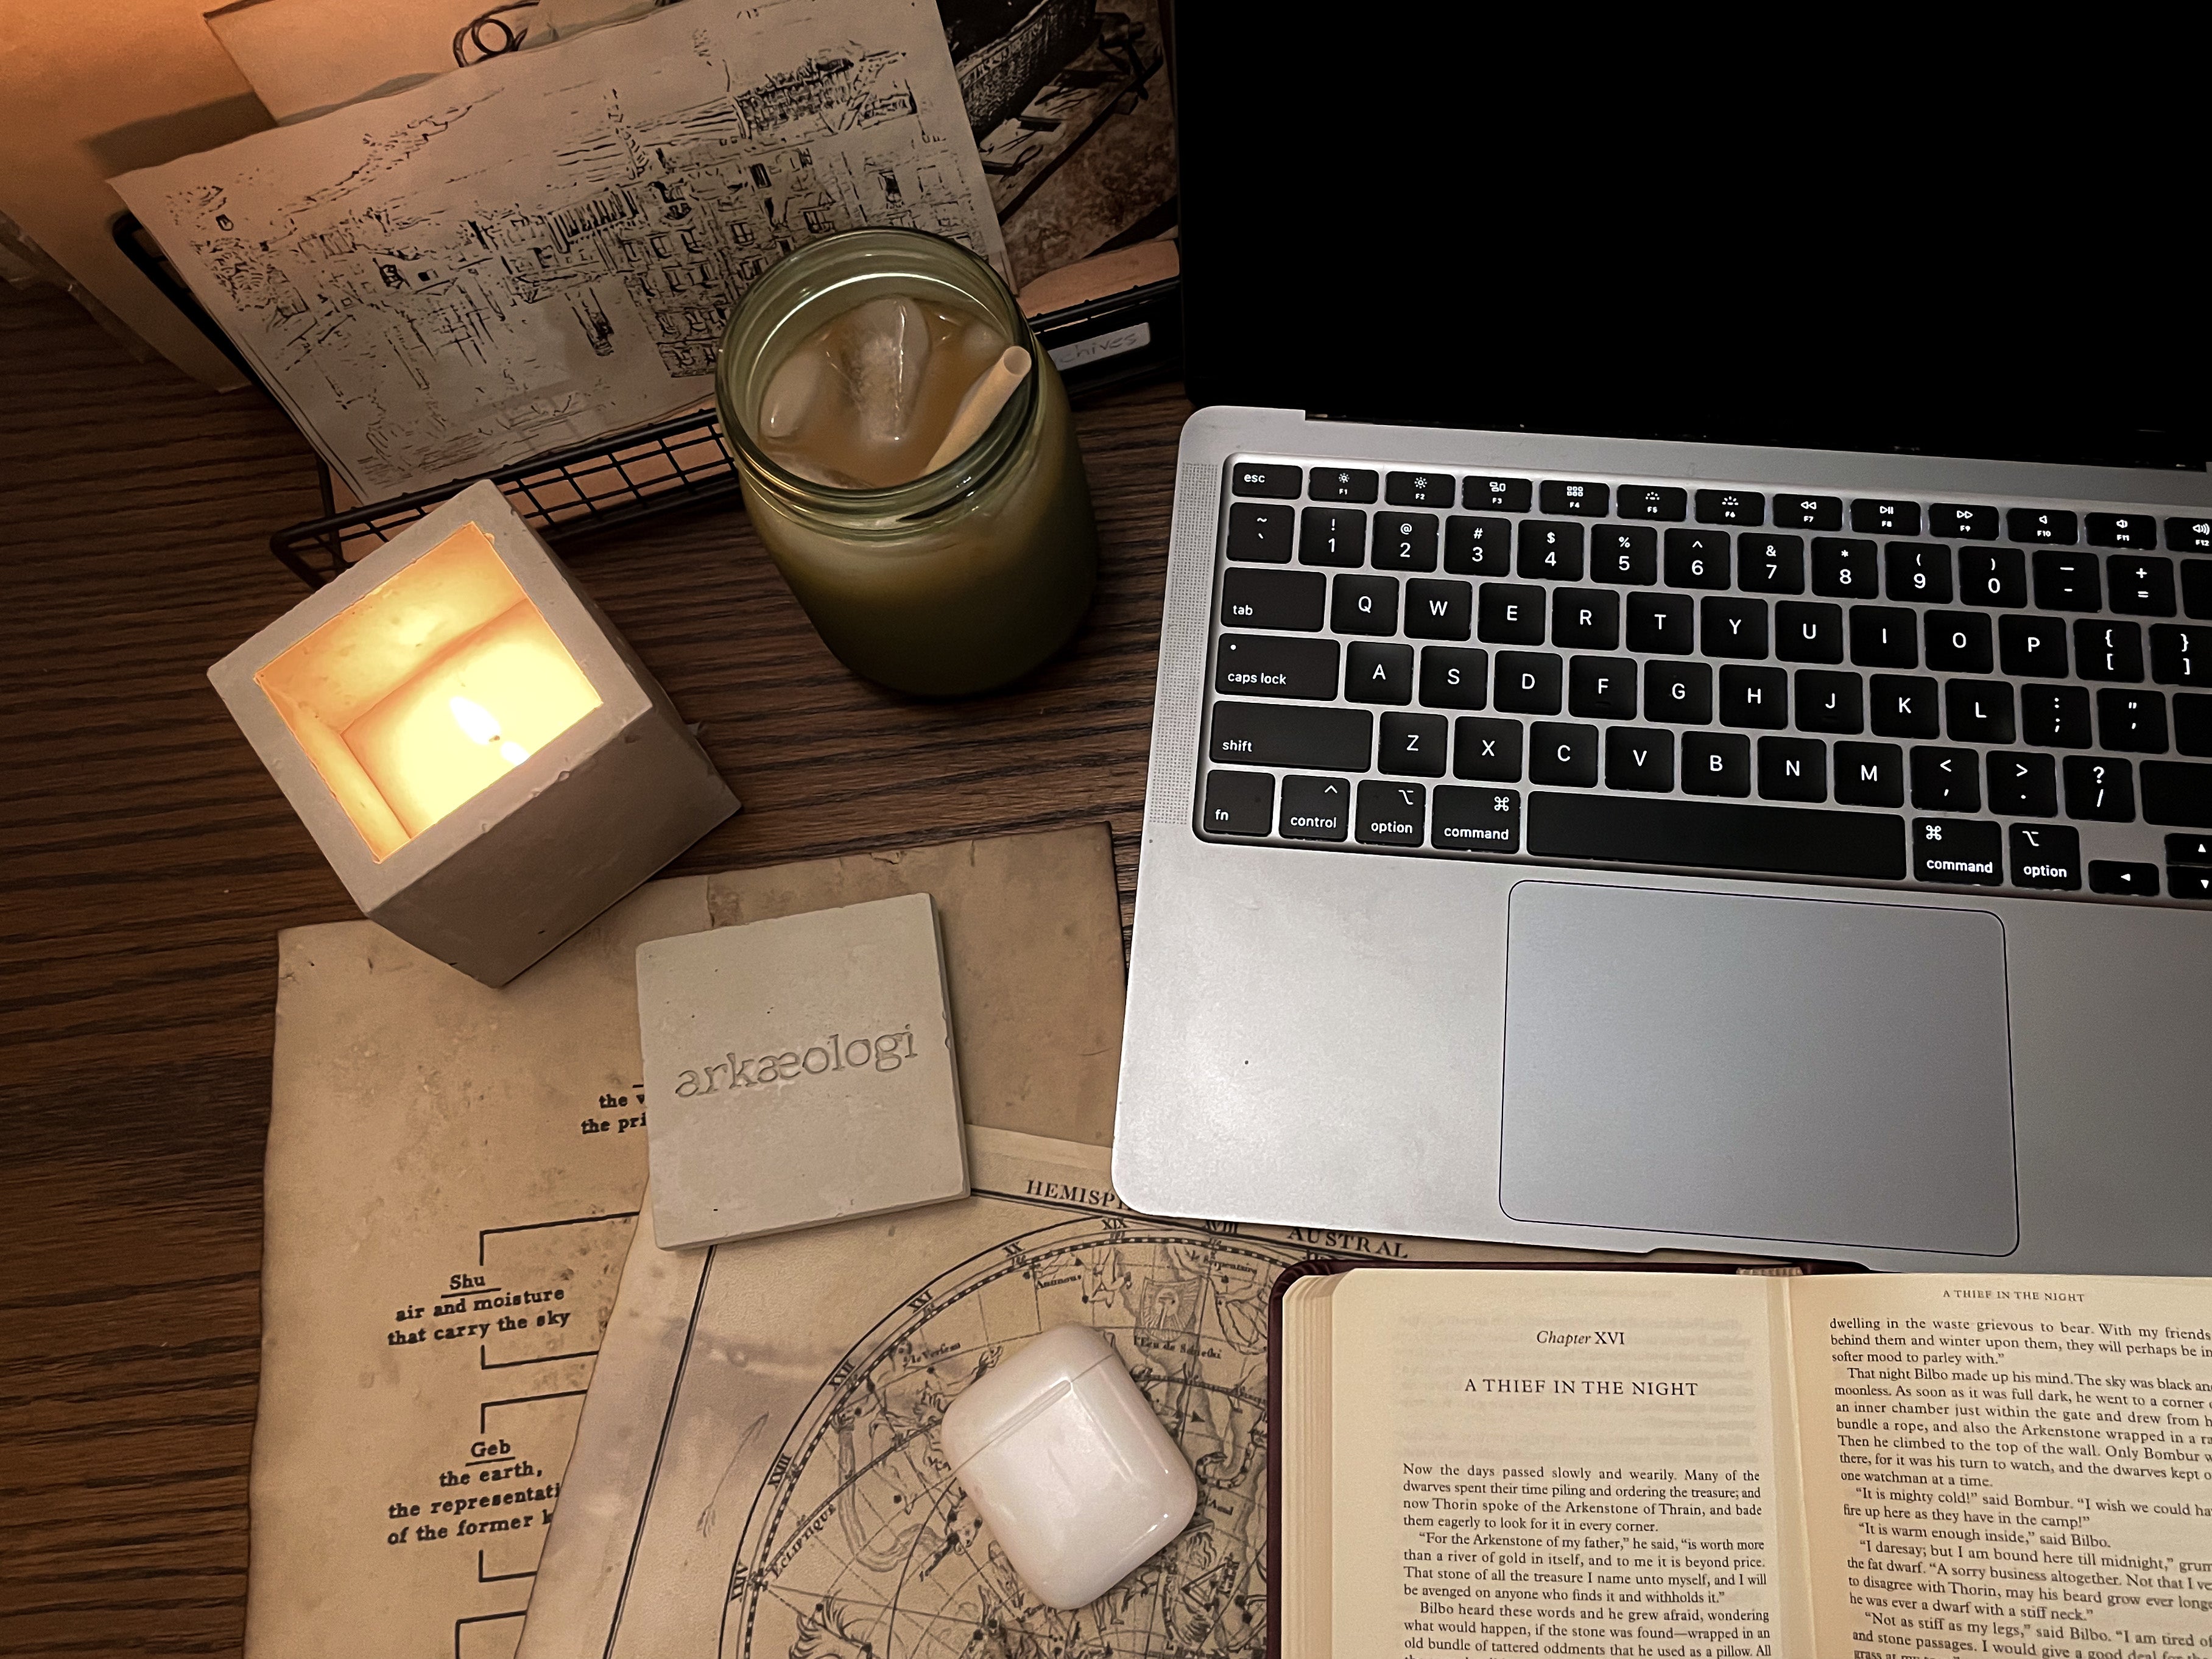 1)	A scented candle lit in a concrete jar, next to a laptop and open book, and iced coffee on a wood table.